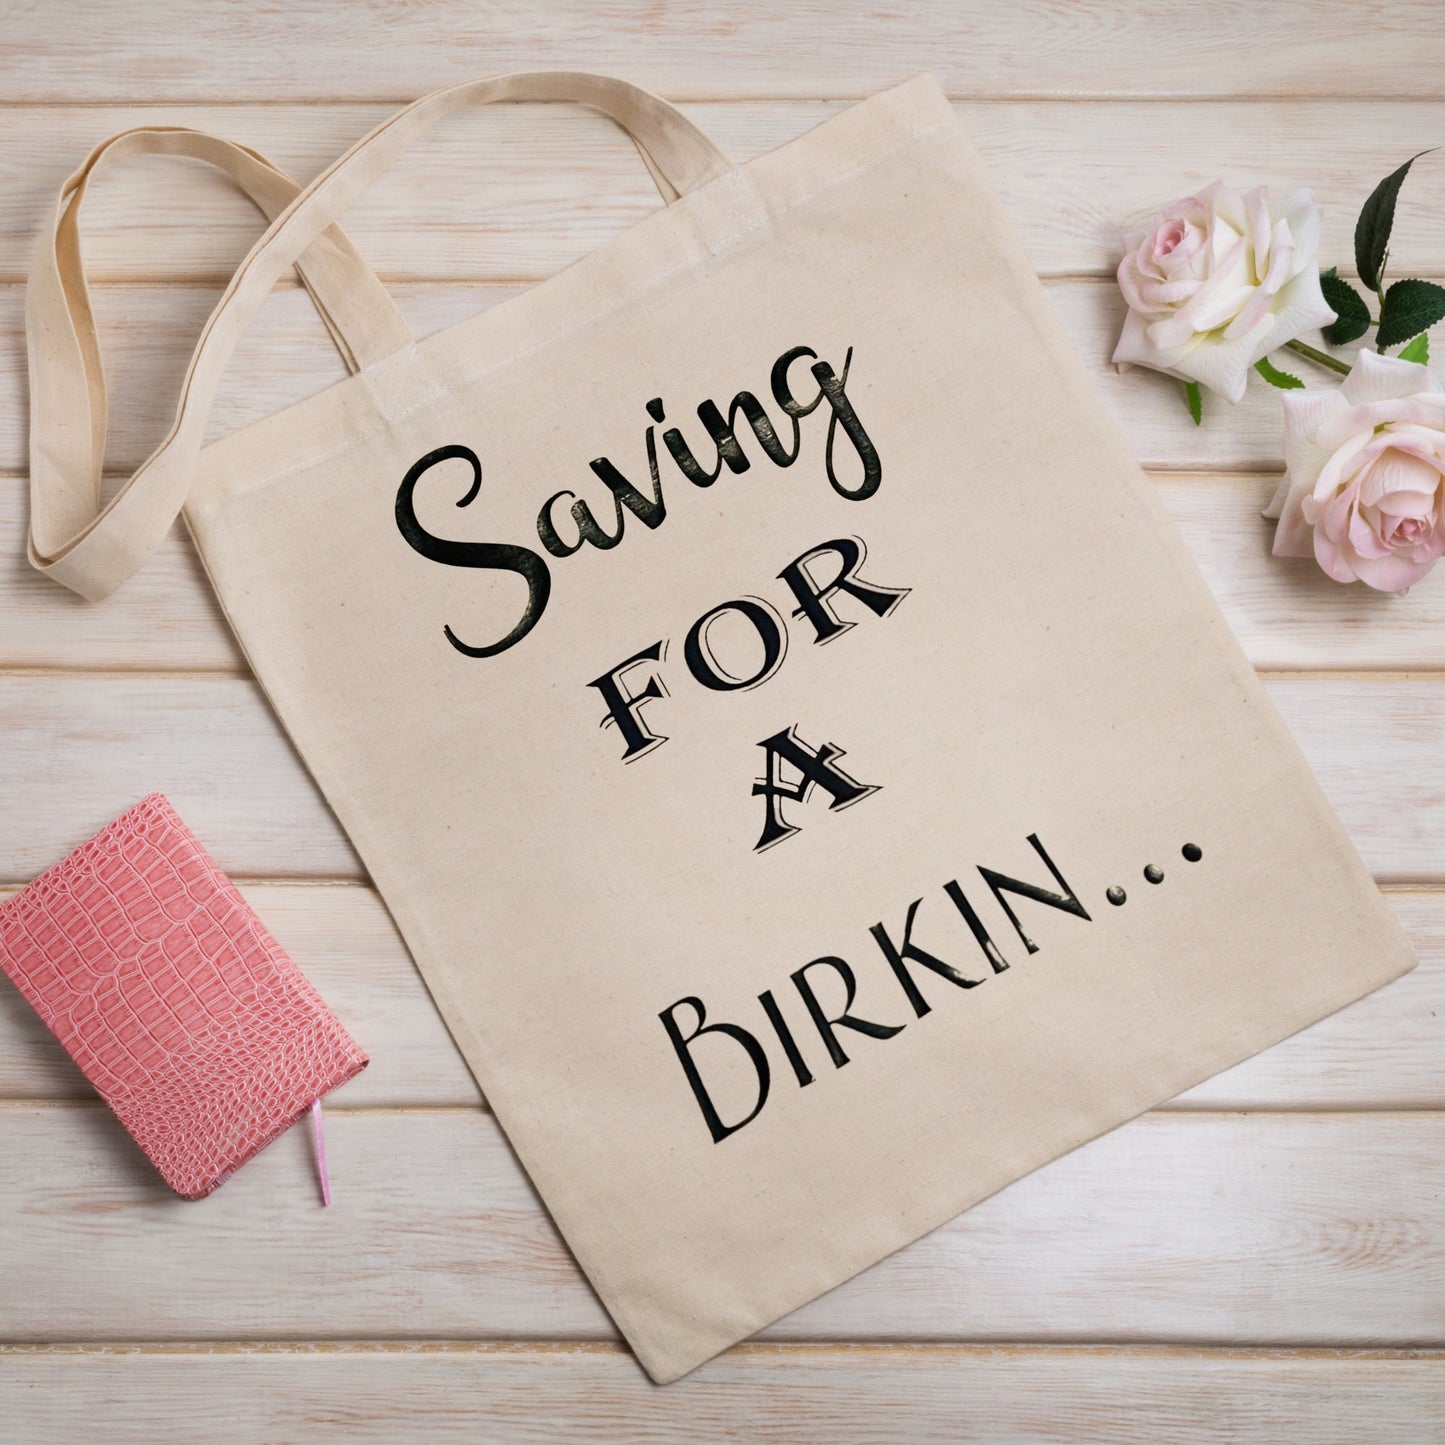 Saving for A Birkin Tote Bag, Novelty Slogan Birthday Gift for Her, Eco Friendly Lightweight Shoulder Bag, Washable Cliche Tote for Her